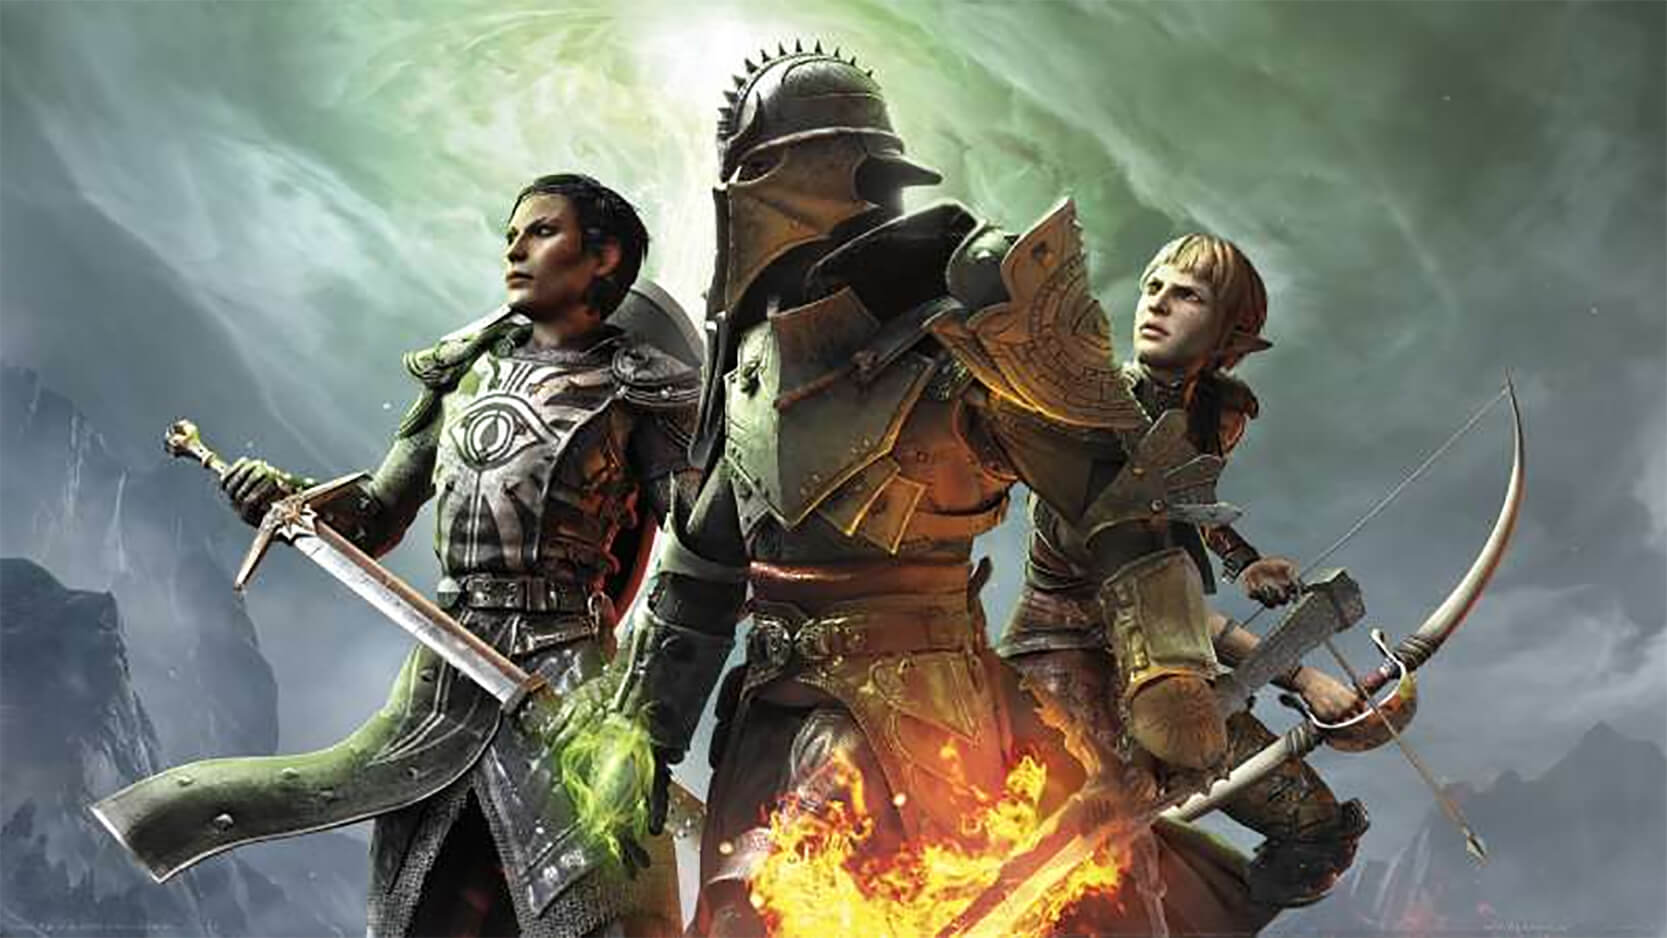 Everything We Know So Far About Dragon Age 4 - The Game ... - 1667 x 938 jpeg 142kB